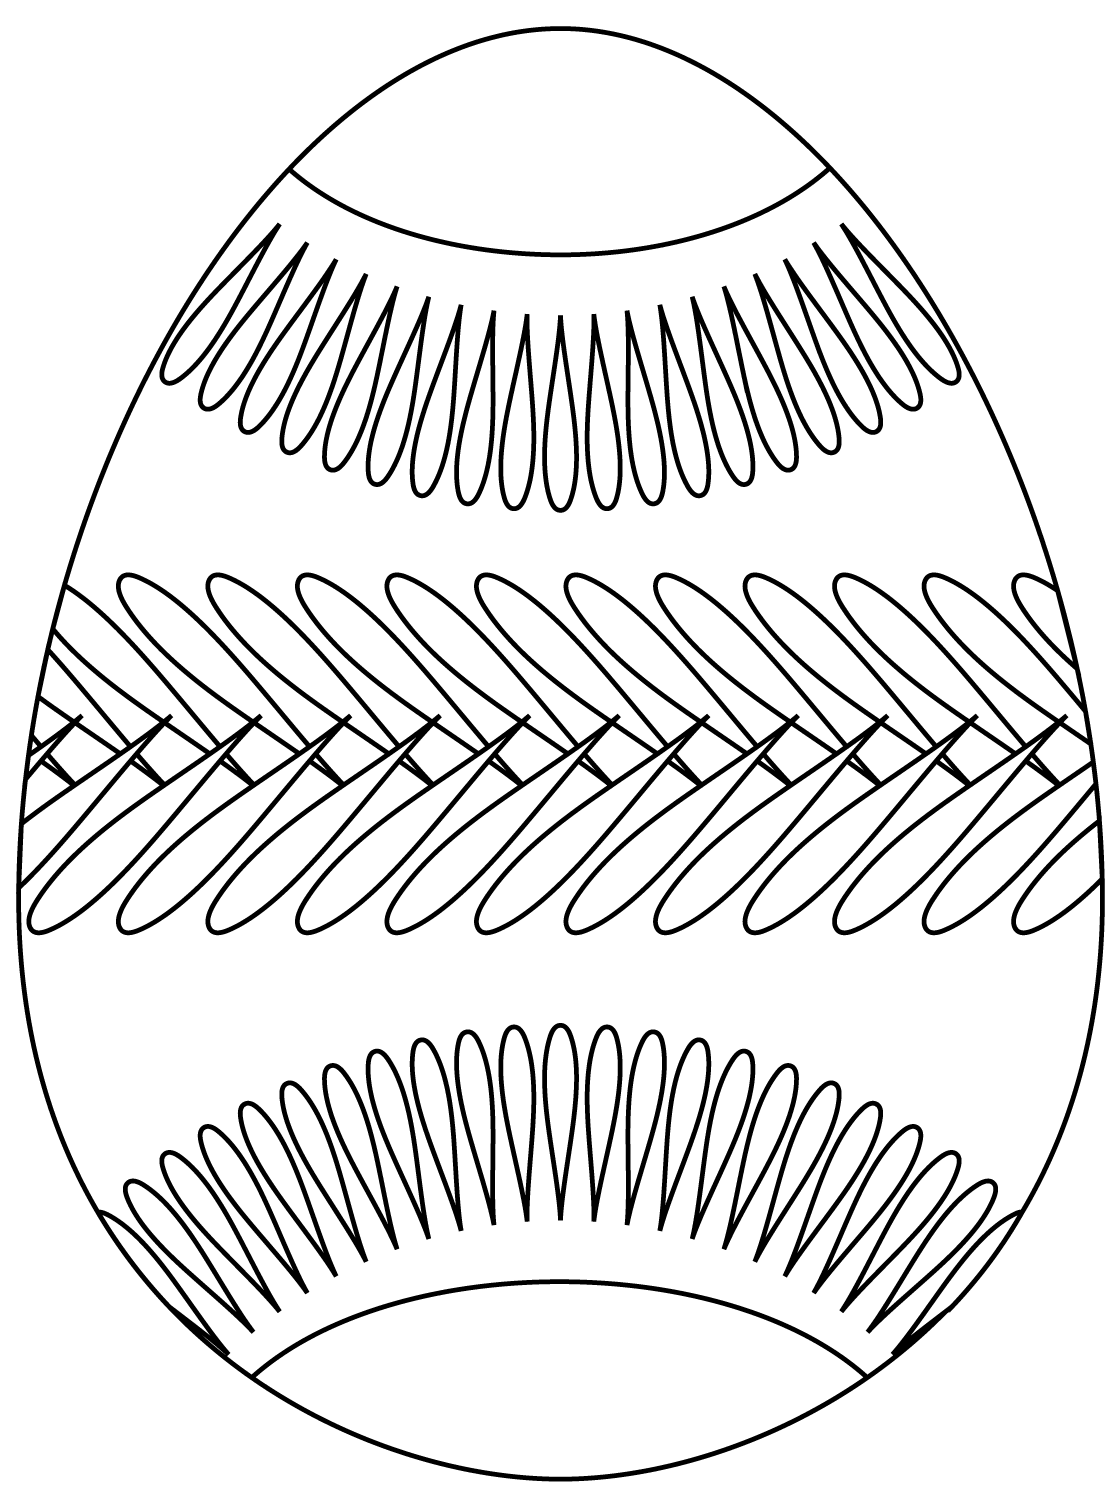 Easter Egg With Belt Pattern Coloring Page